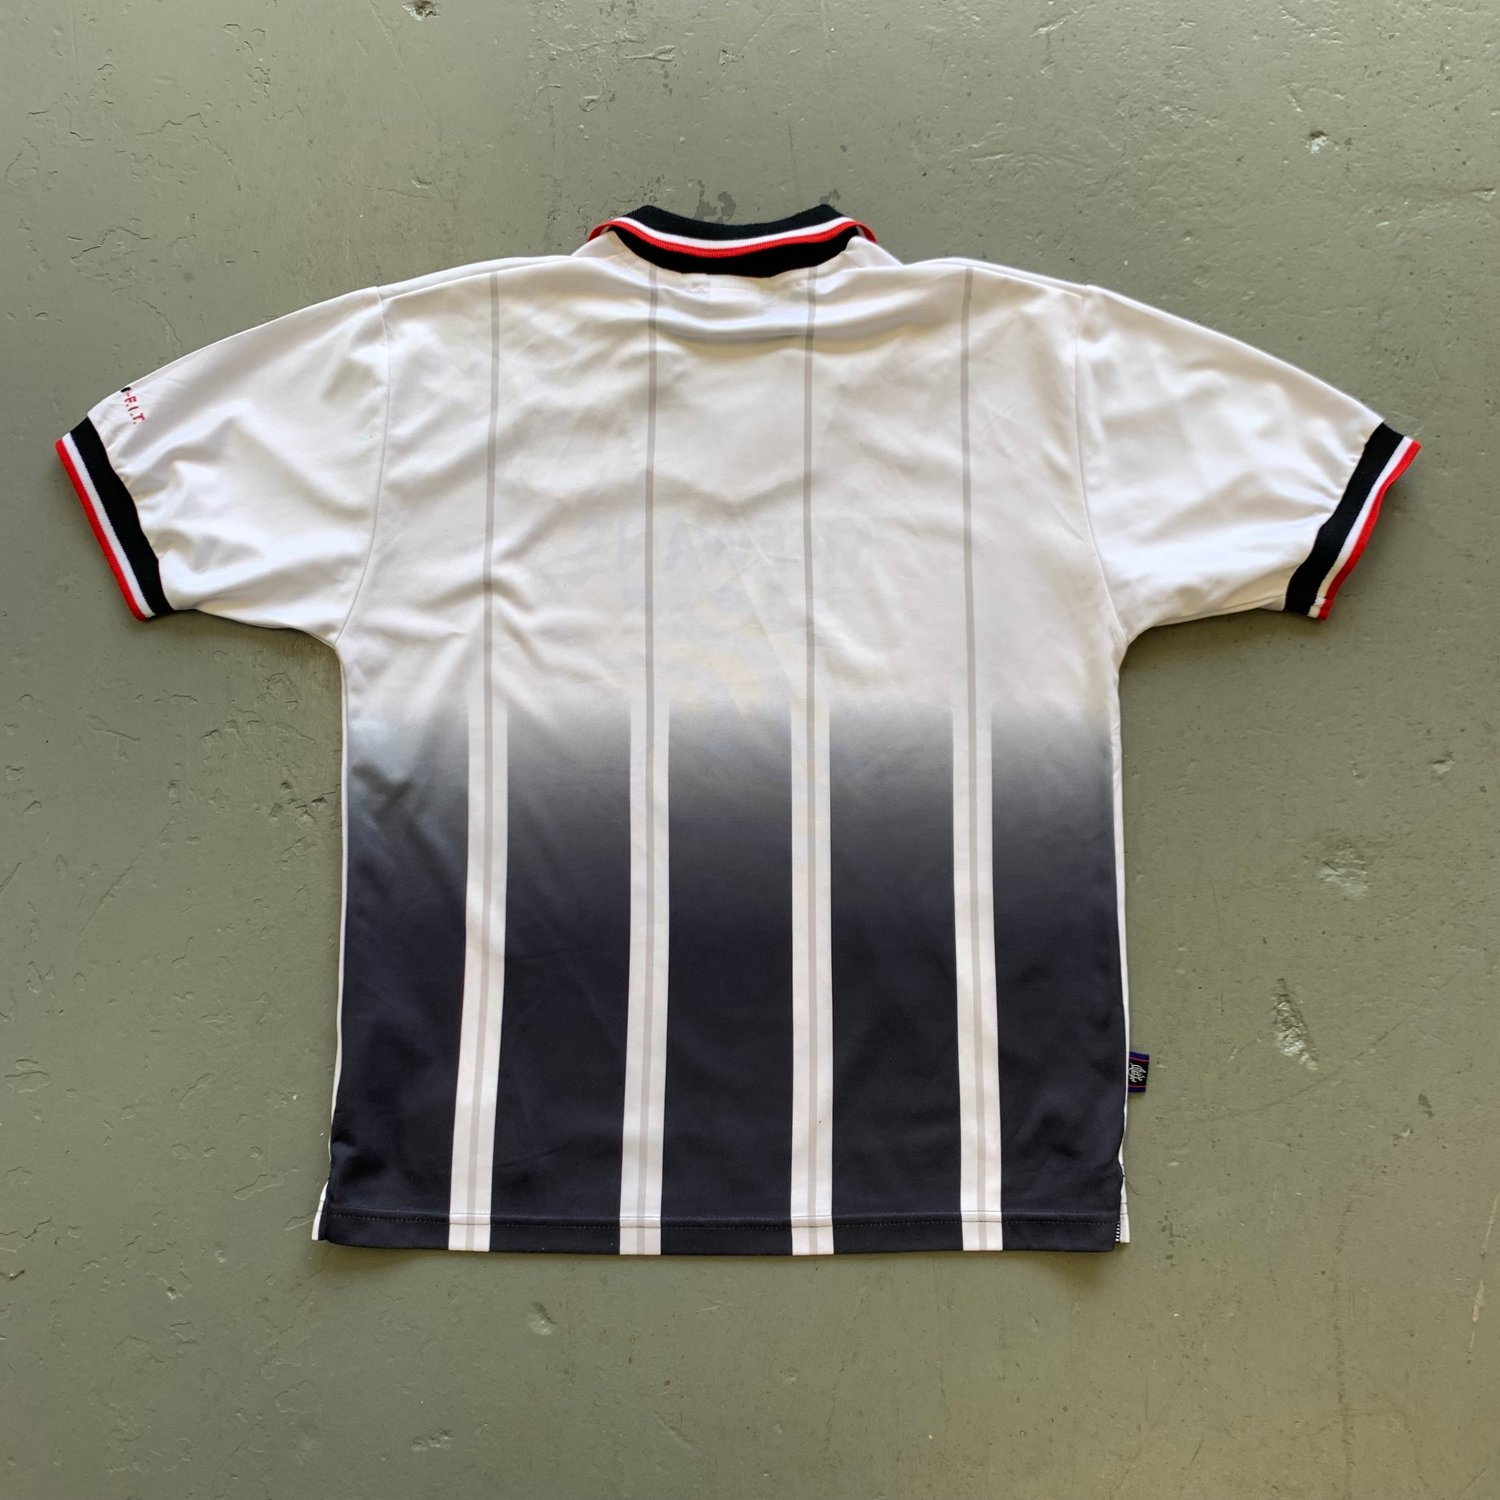 Image of 97/99 Rangers away shirt fits size small 